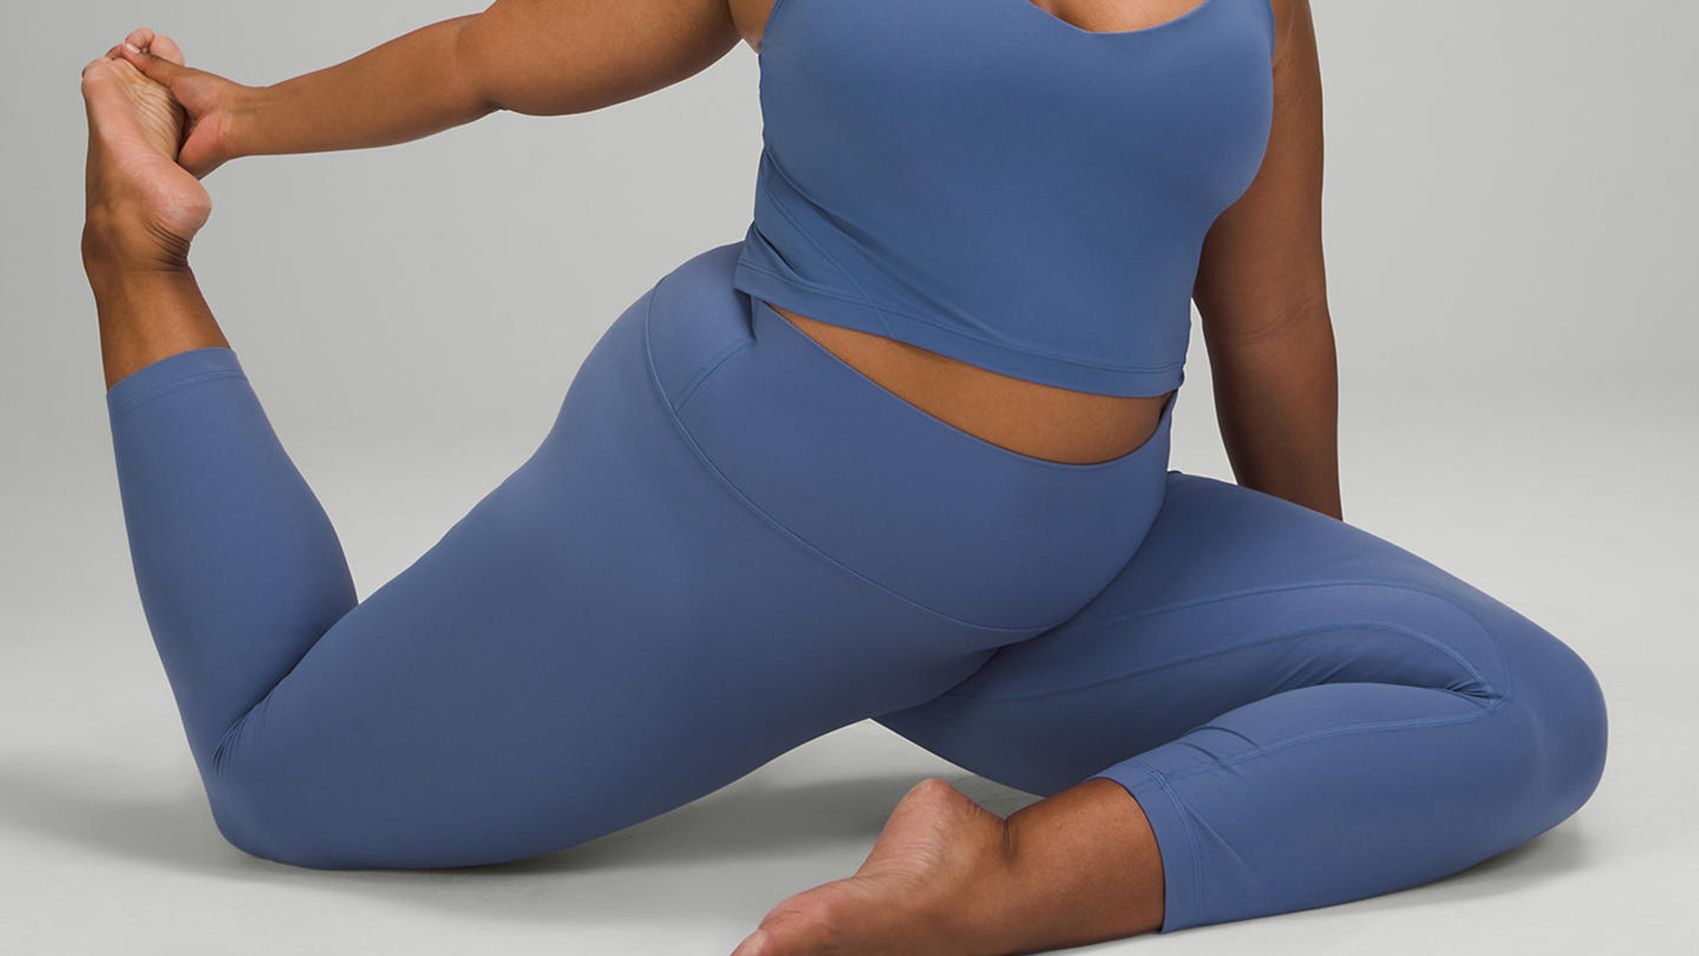 Lululemon Cyber Monday deals 2021: Yoga mats, Wunder Unders and